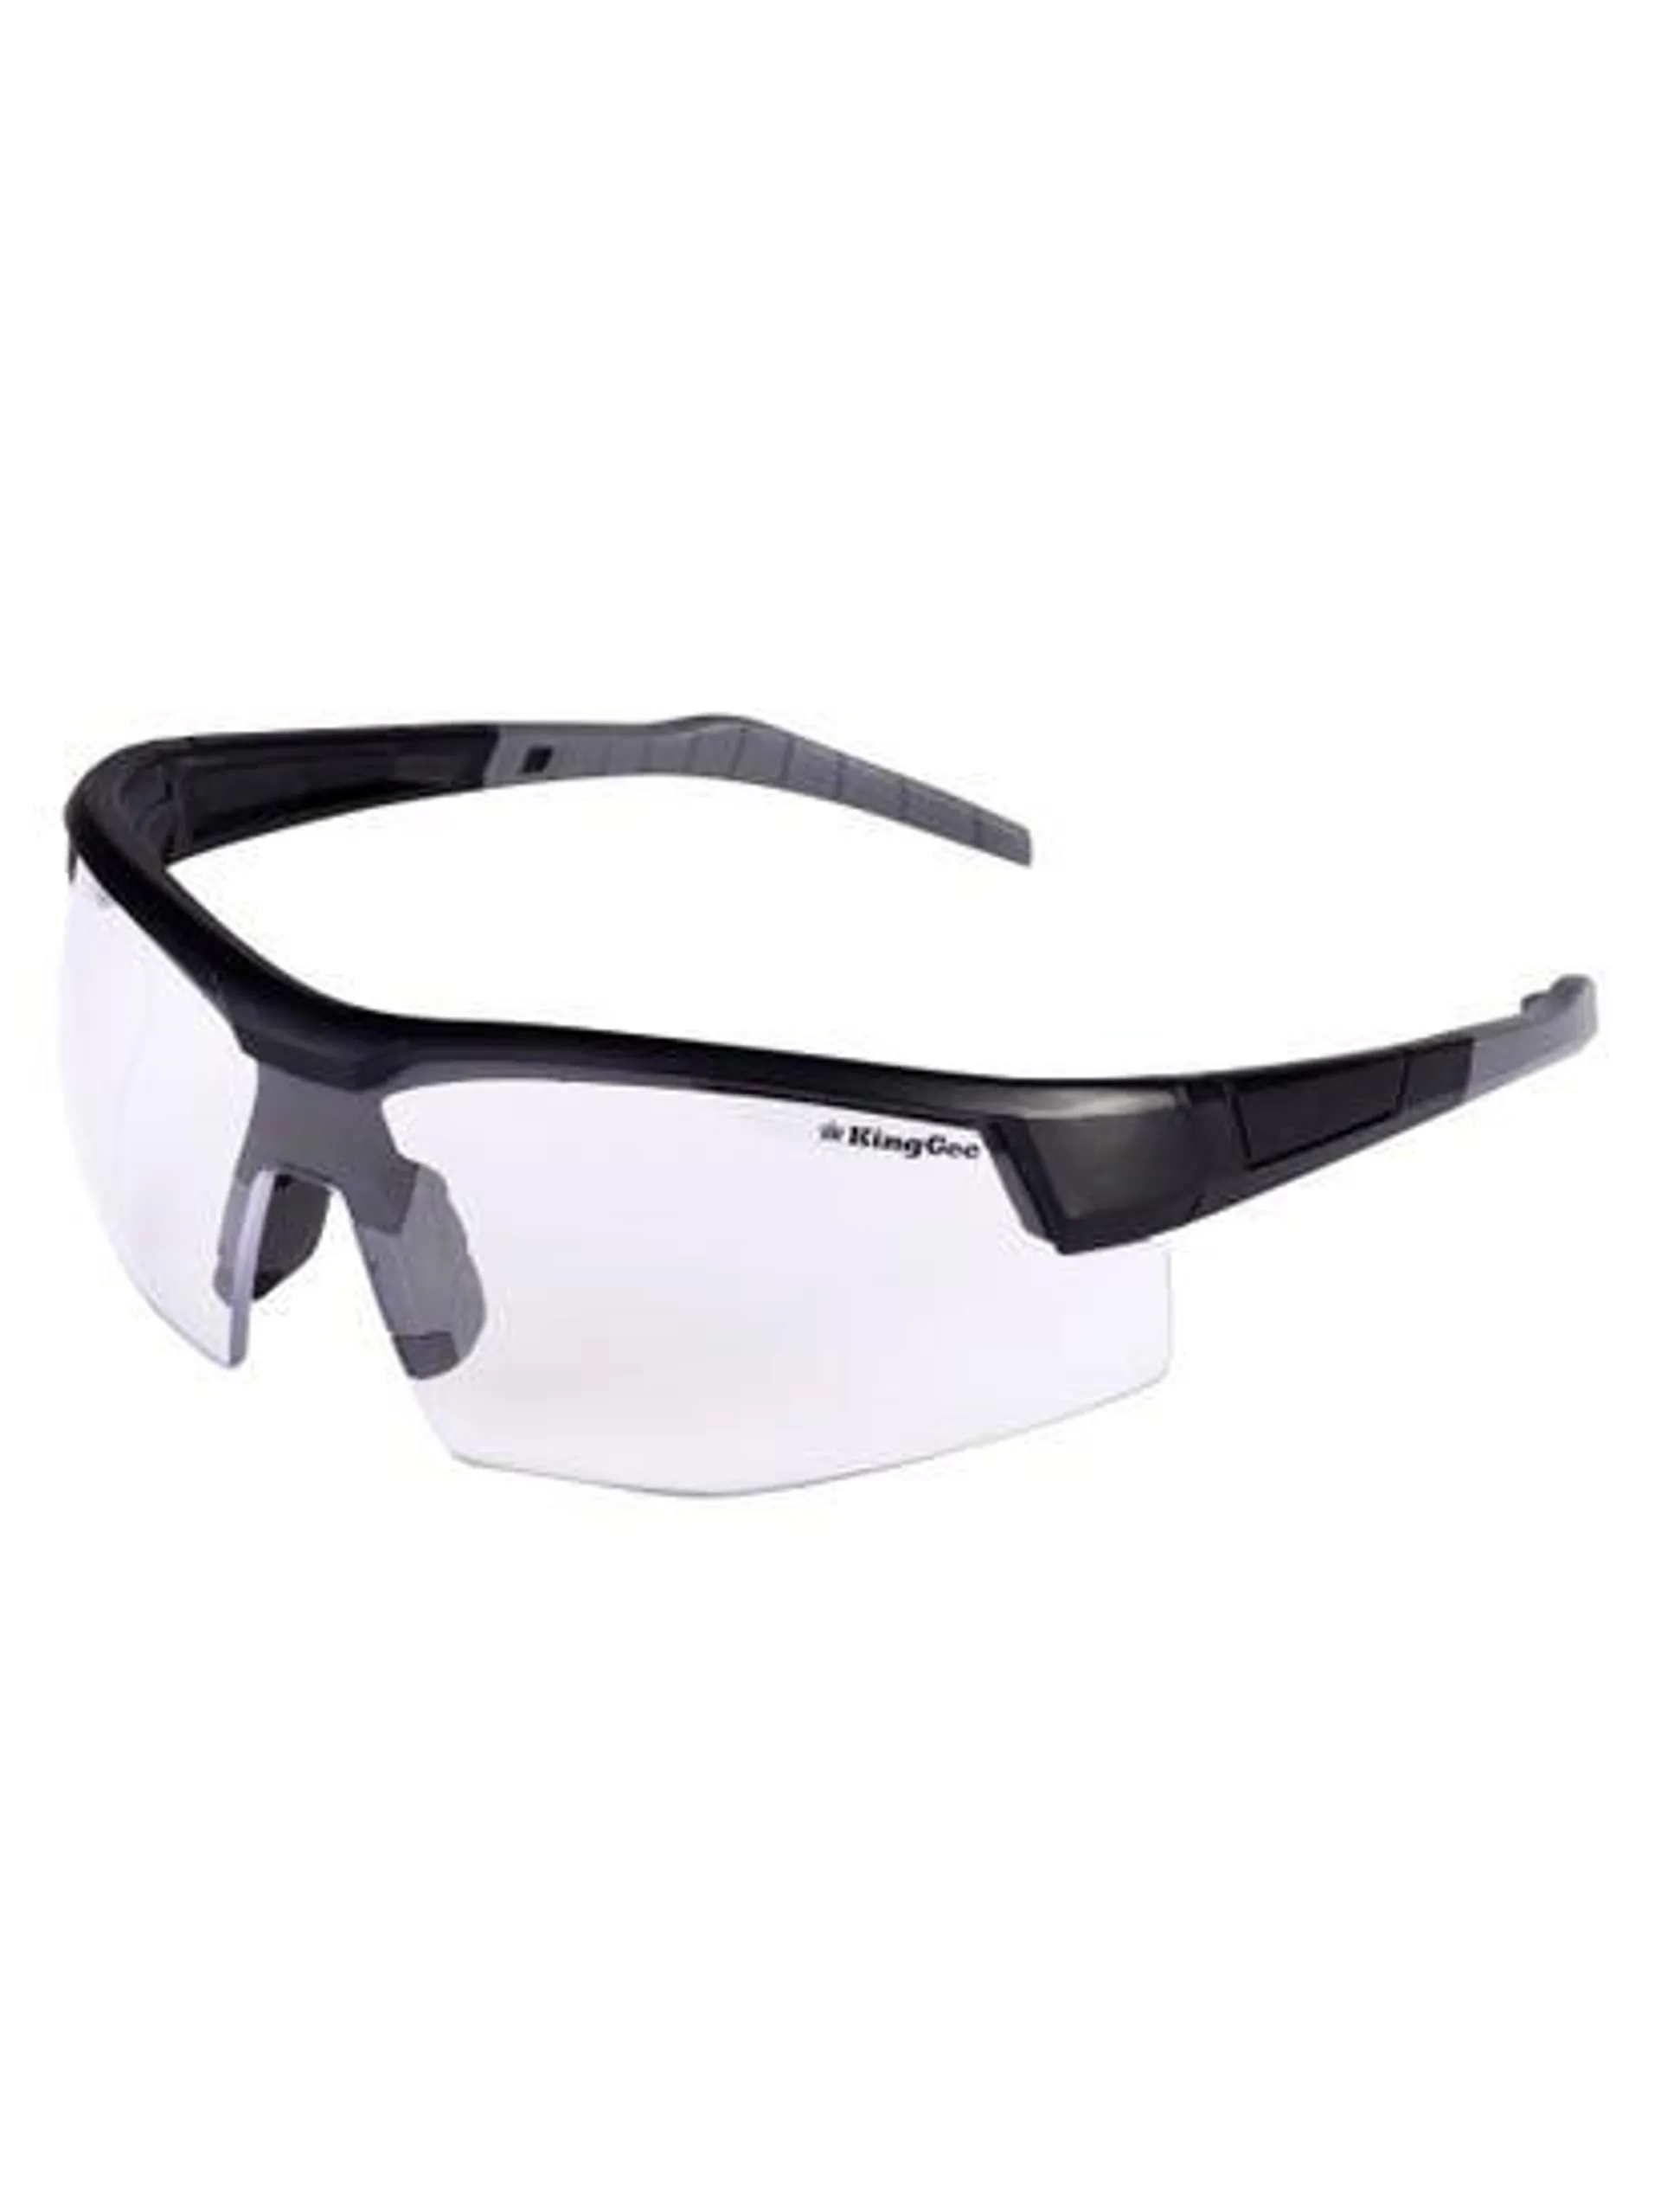 King Gee Combat Clear Safety Glasses